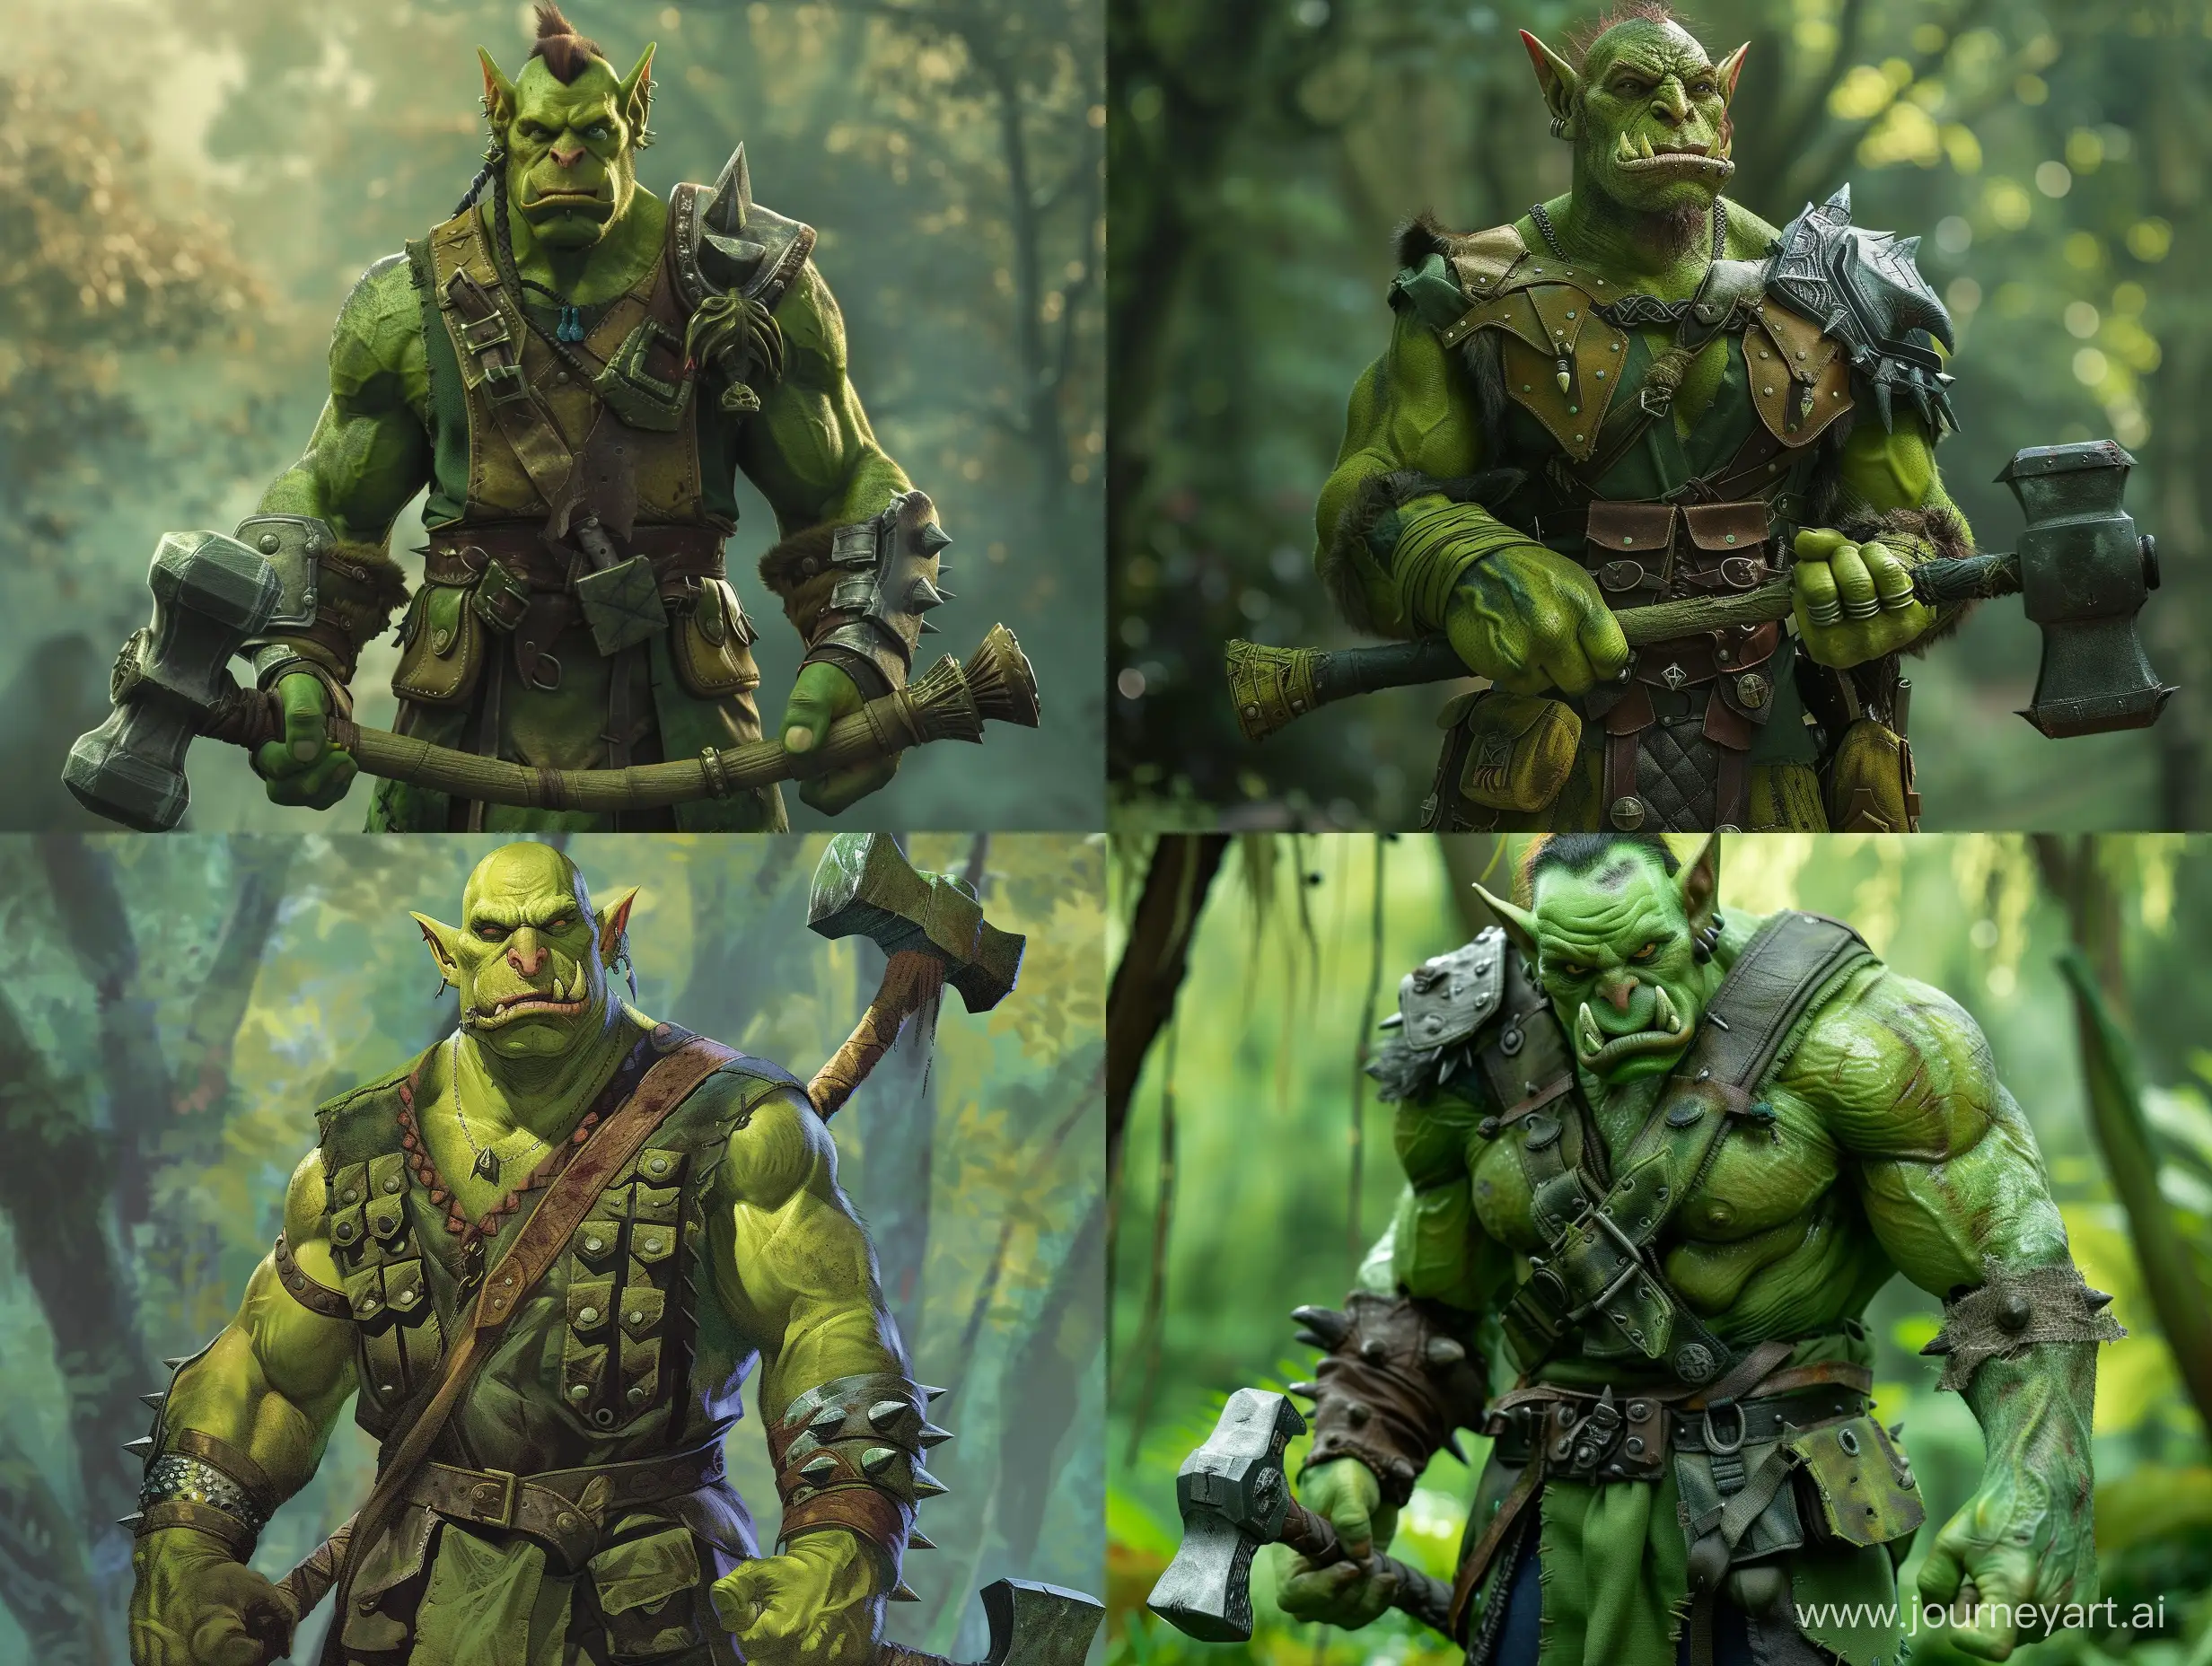 An orc with green skin. He is wearing a green shirt and a leather vest with many pockets. He holds a two-handed war hammer in his hands. it stands against the background of the forest